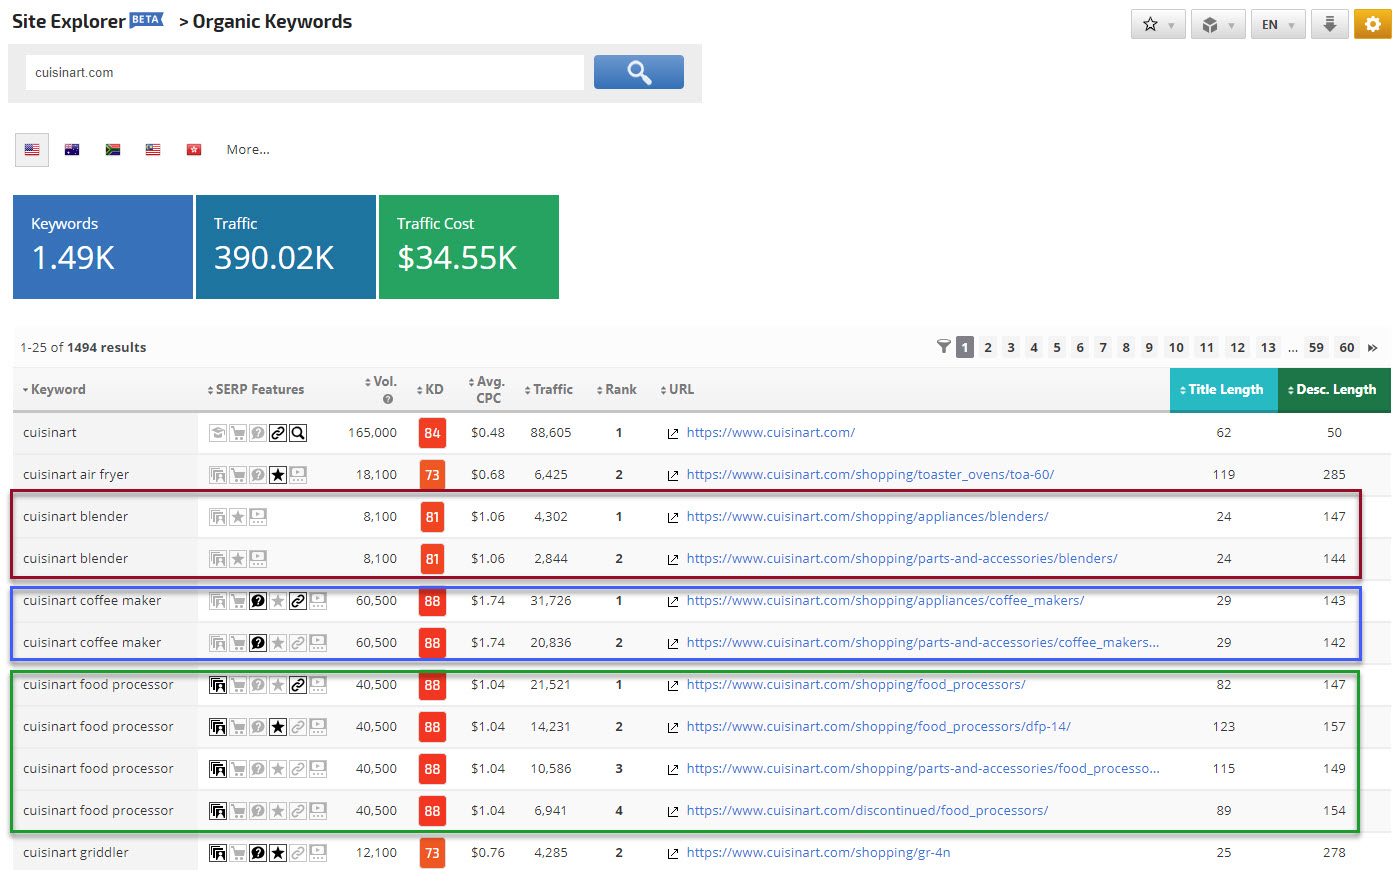 view multiple landing pages per keyword